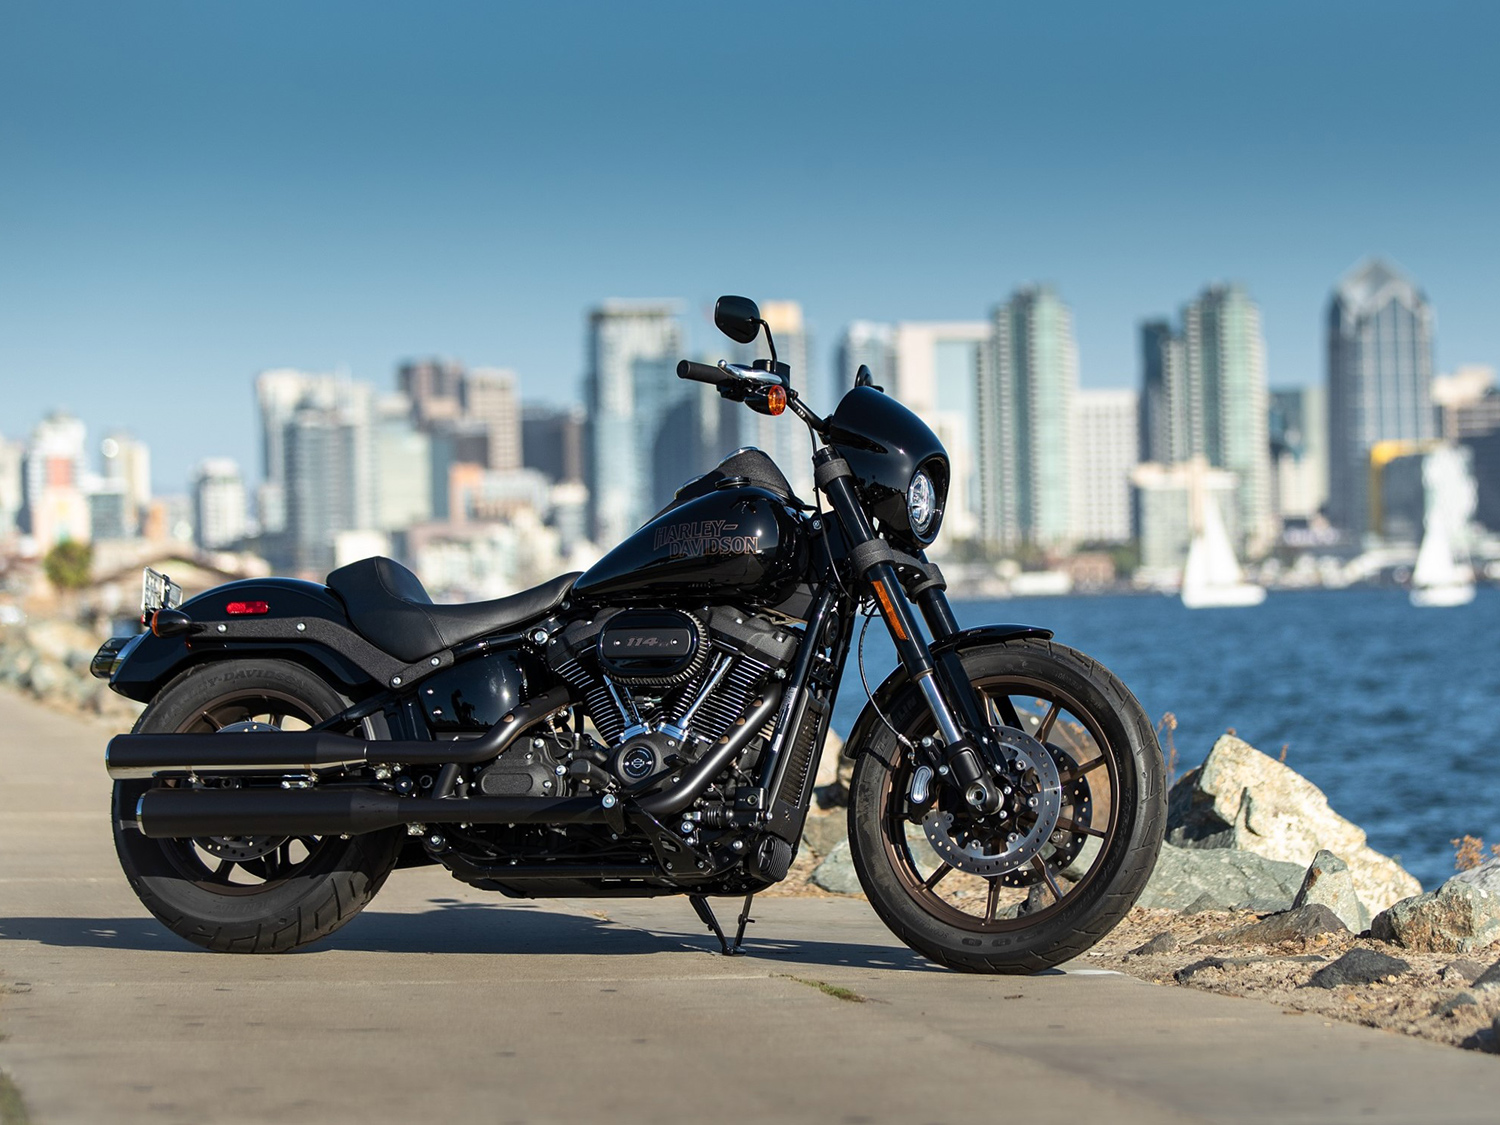 2020 Harley Davidson Low Rider S First Look 9 Fast Facts